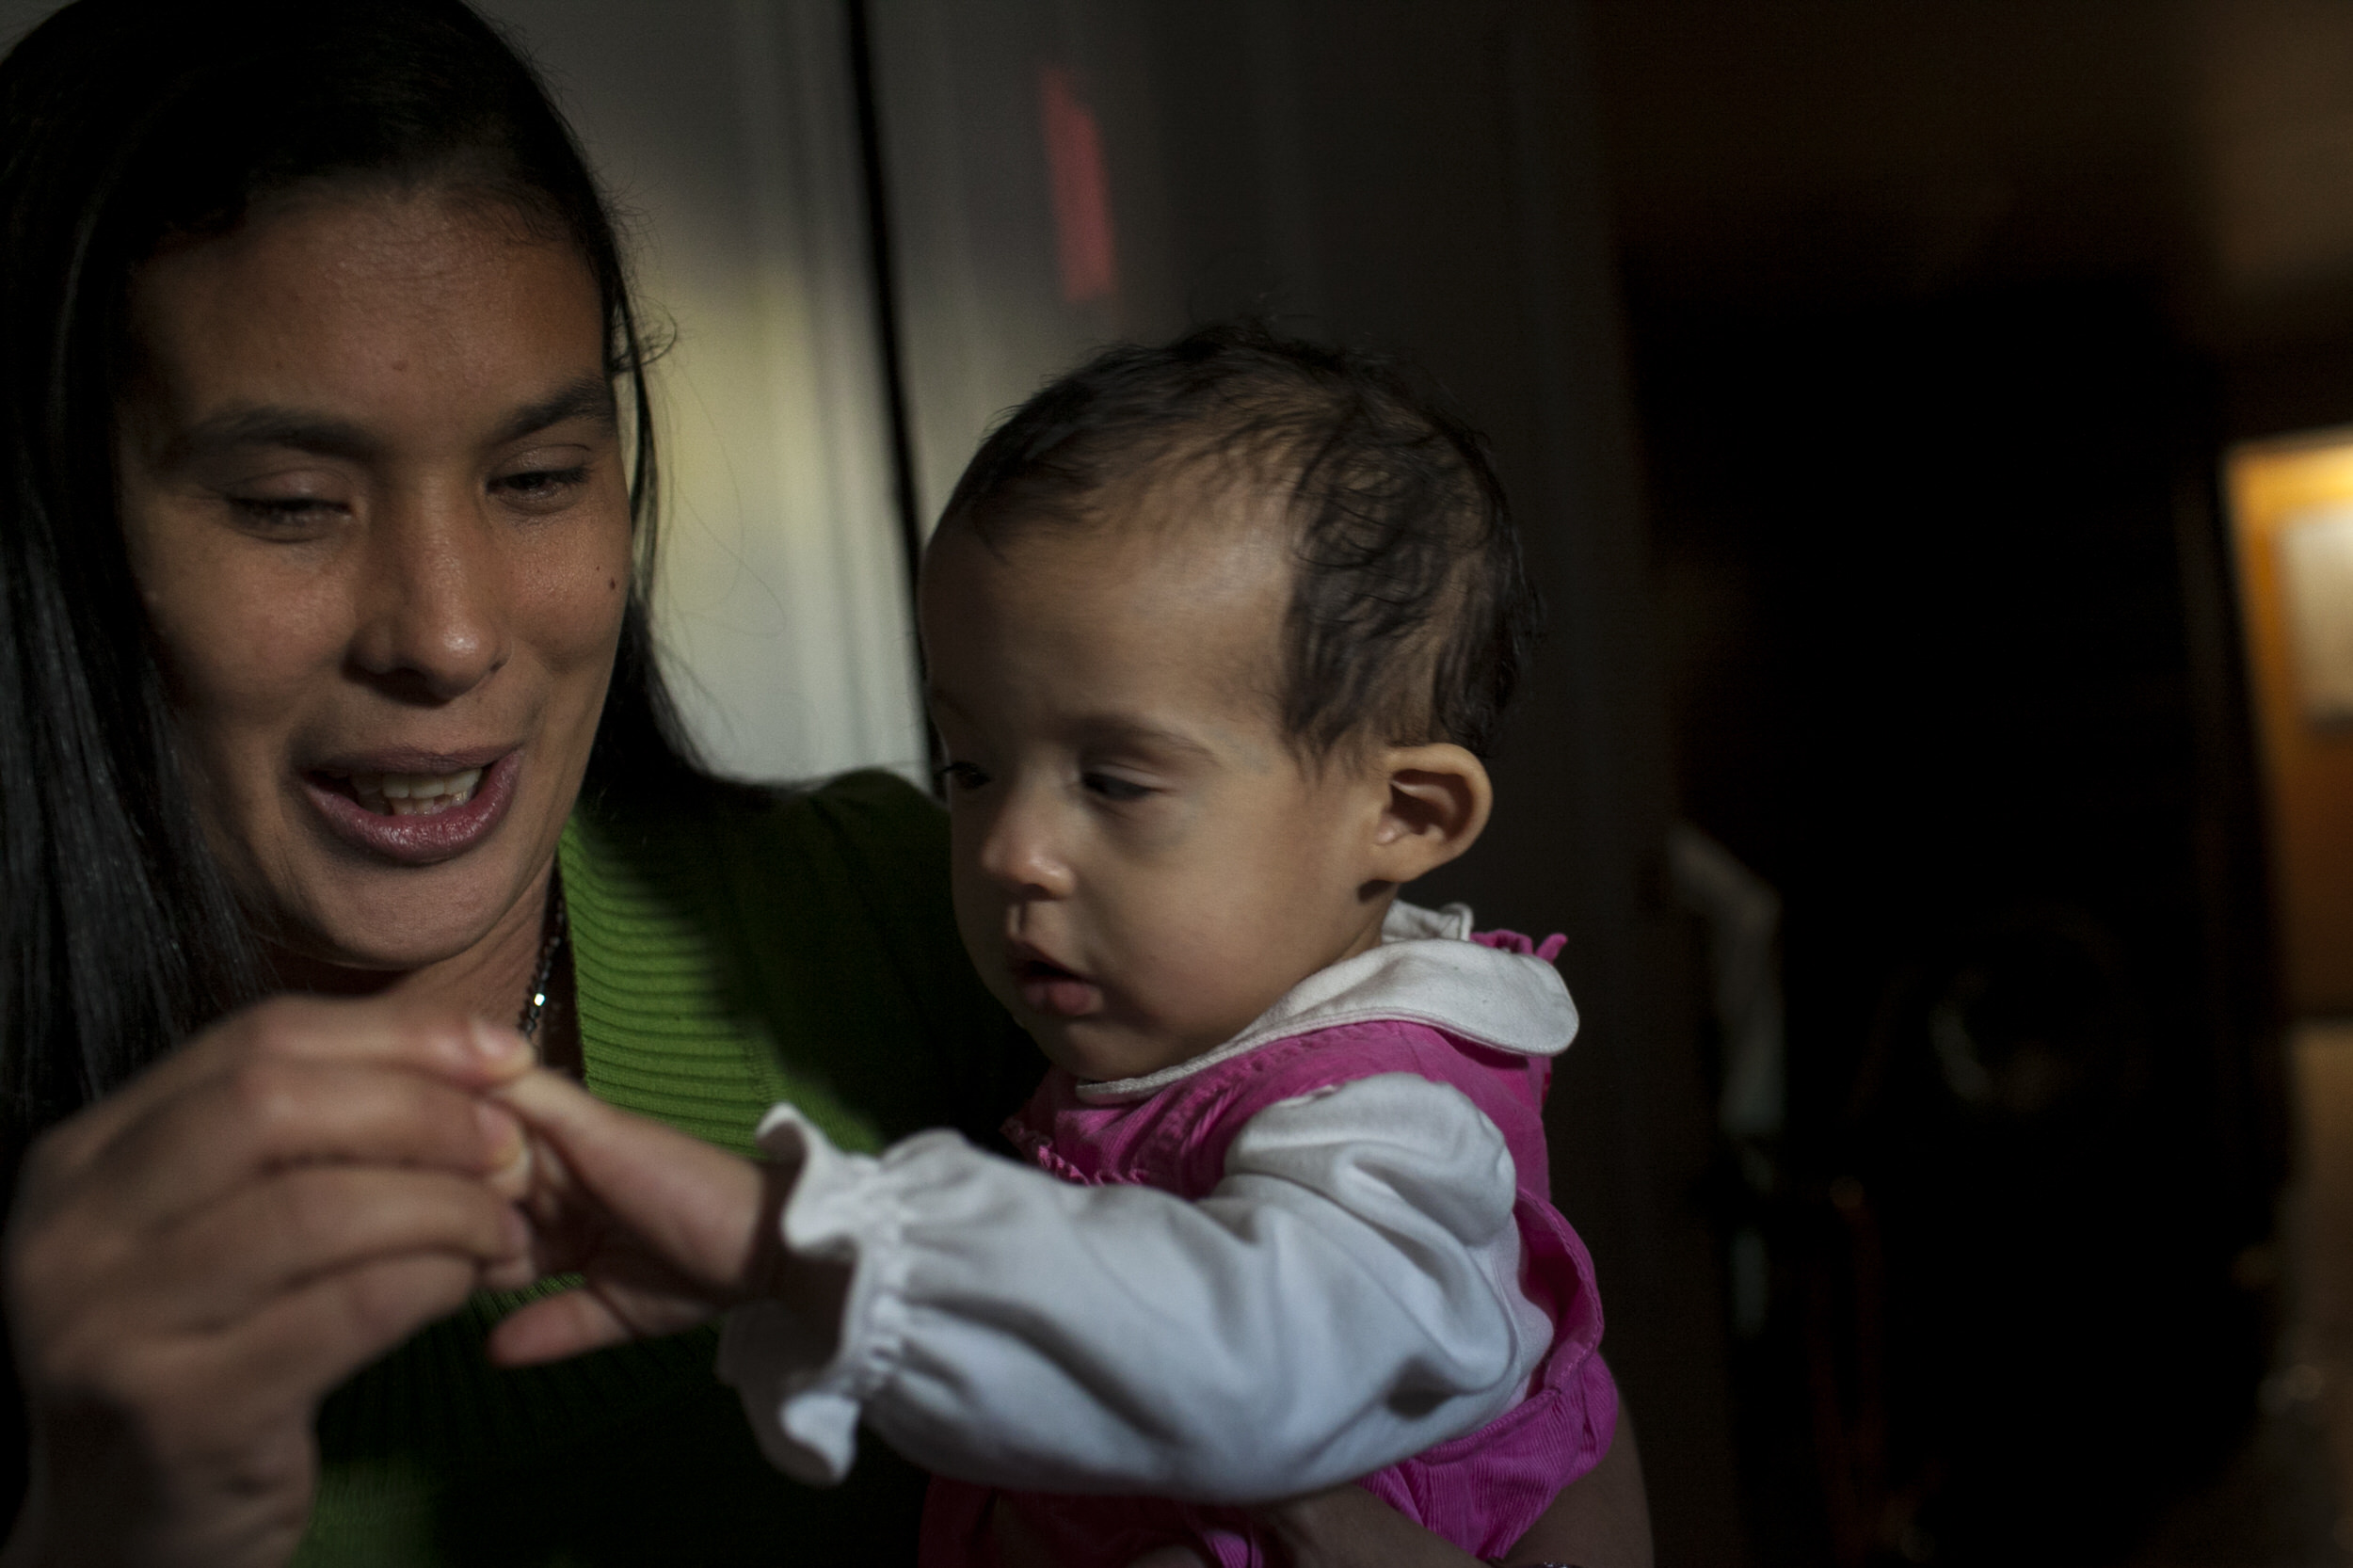  Yugely Nuñez and her daughter who share a genetic retinal disorder. Brooklyn, NY 